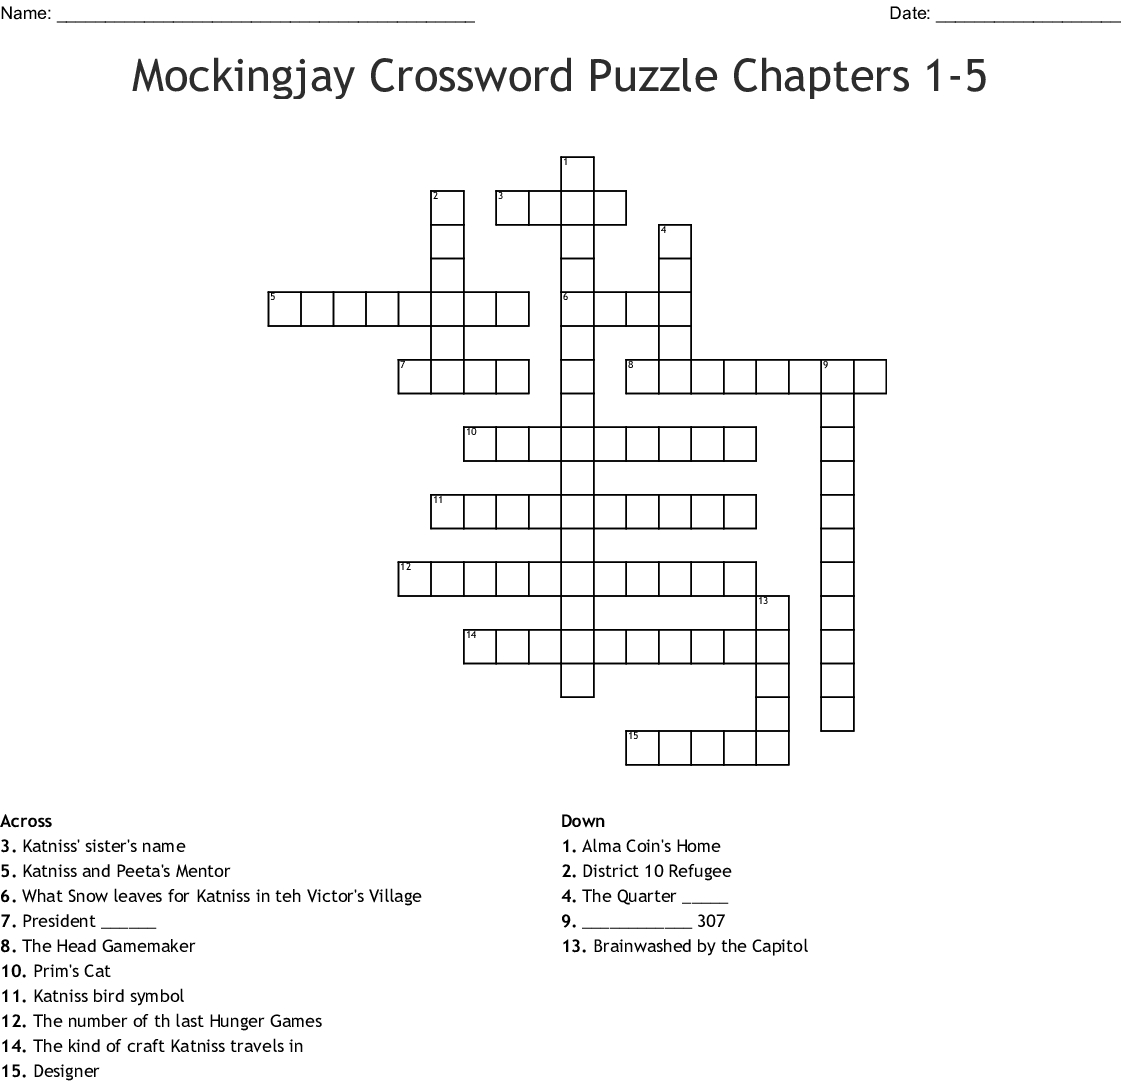 Mockingjay Crossword Puzzle Chapters 1-5 Crossword - Wordmint - Hunger Games Crossword Puzzle Printable